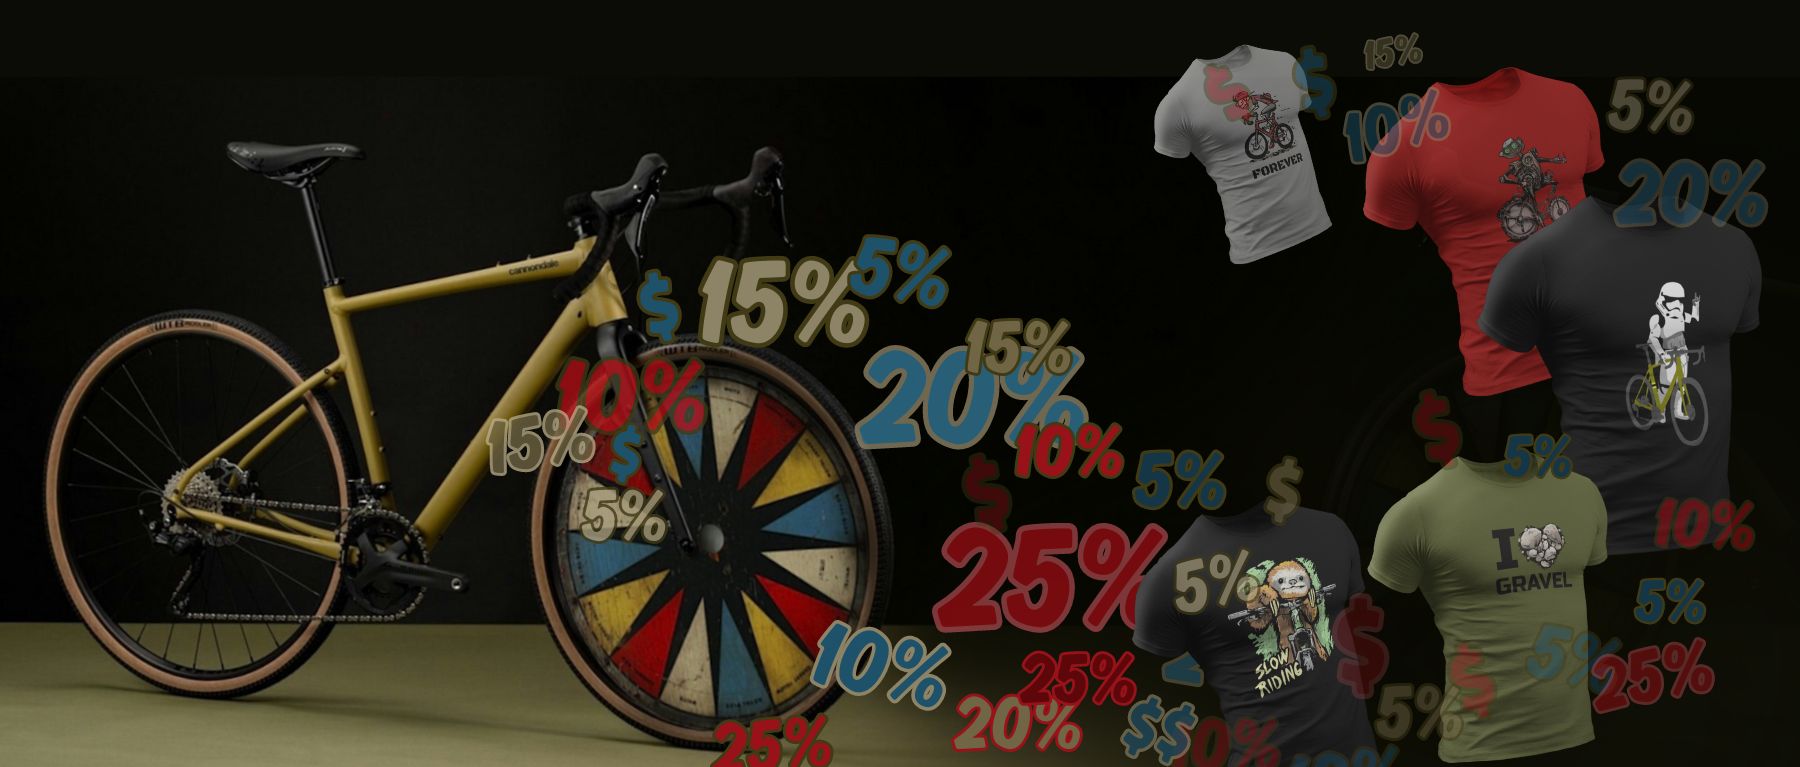 Spin the Wheel to win. Instante rebate + Free bicycle t-shirts